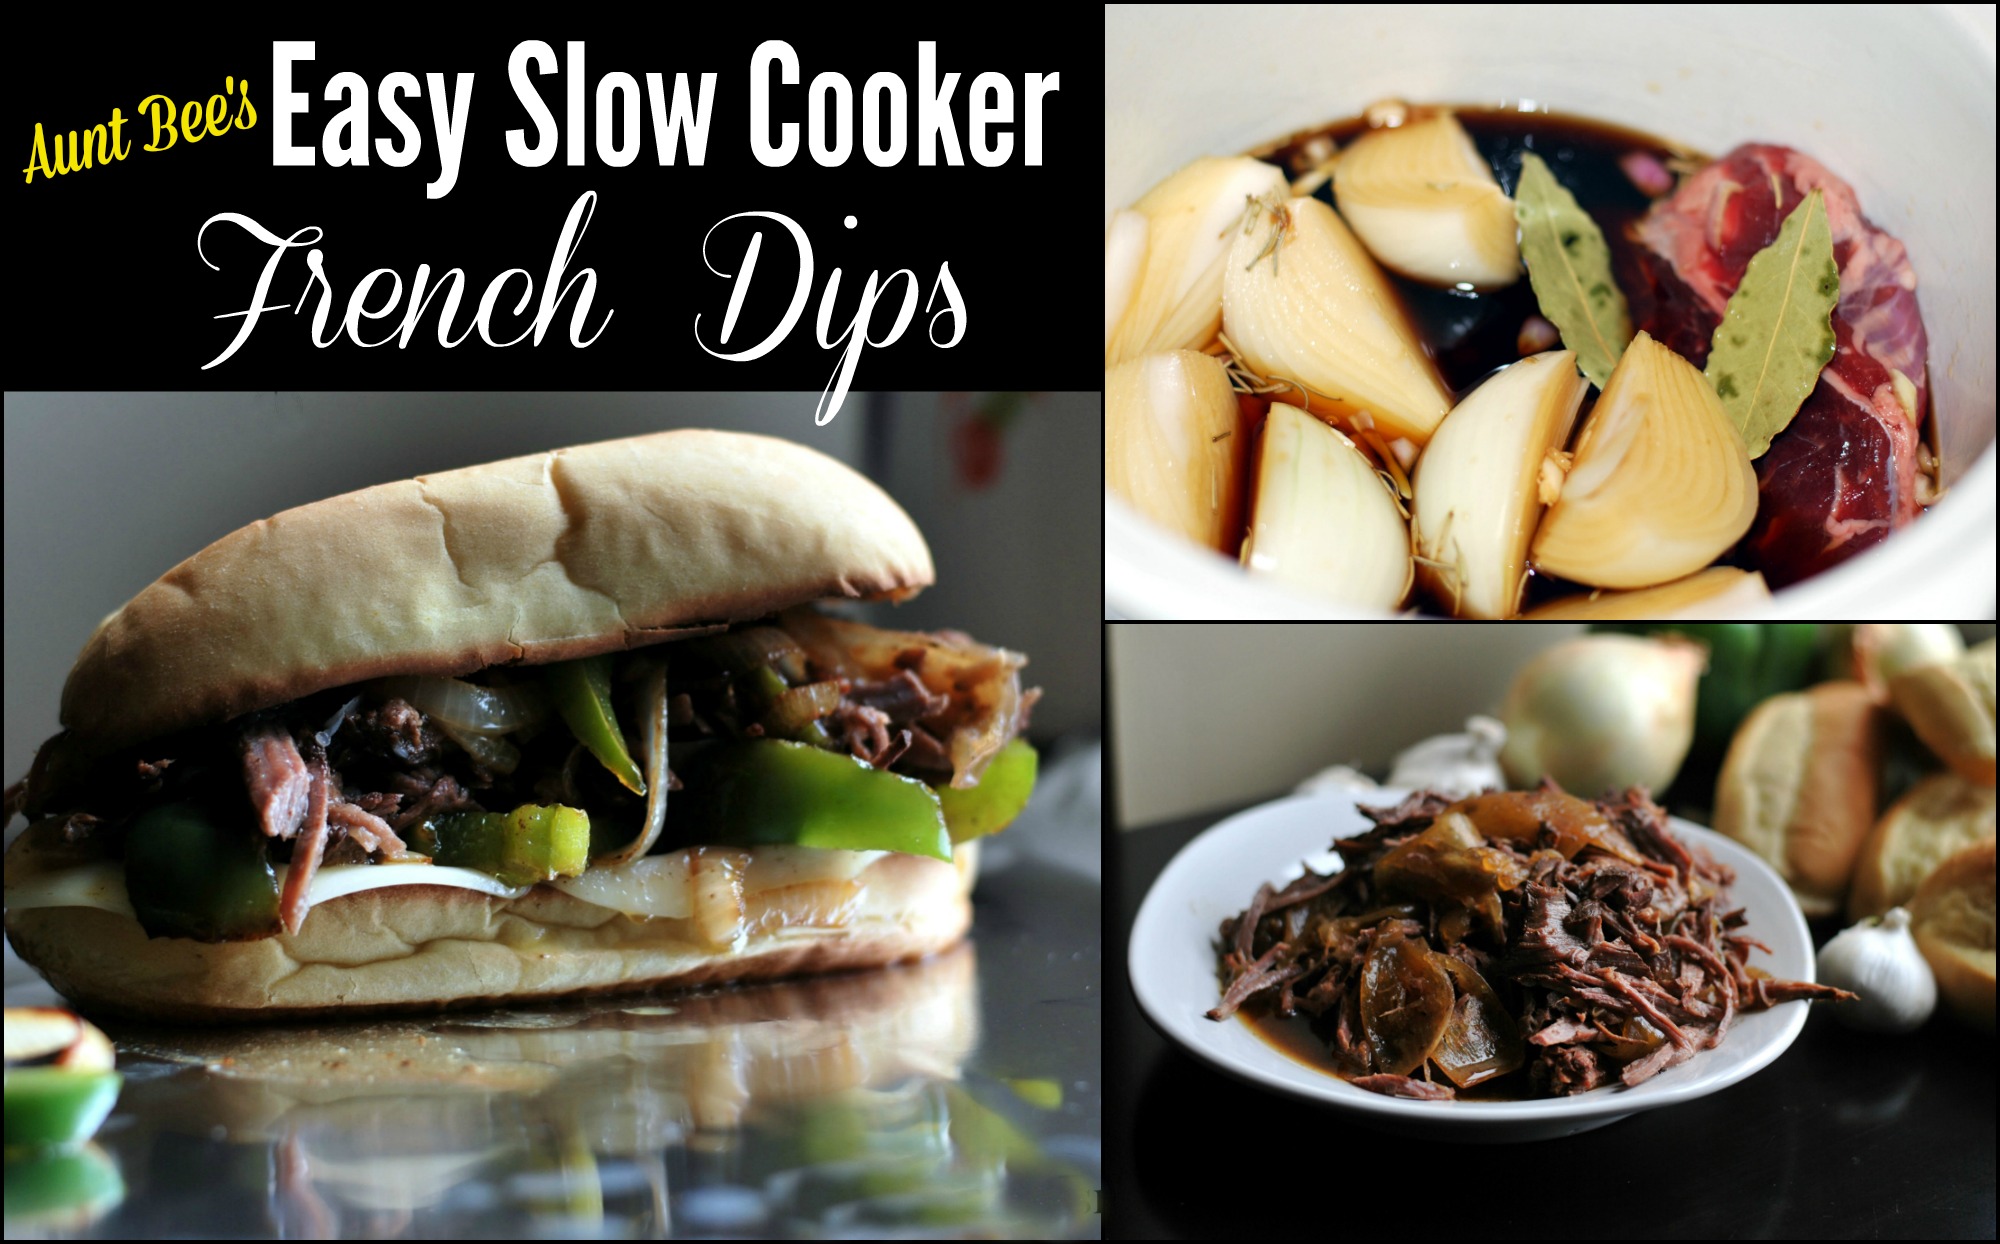 Easy Slow Cooker French Dips